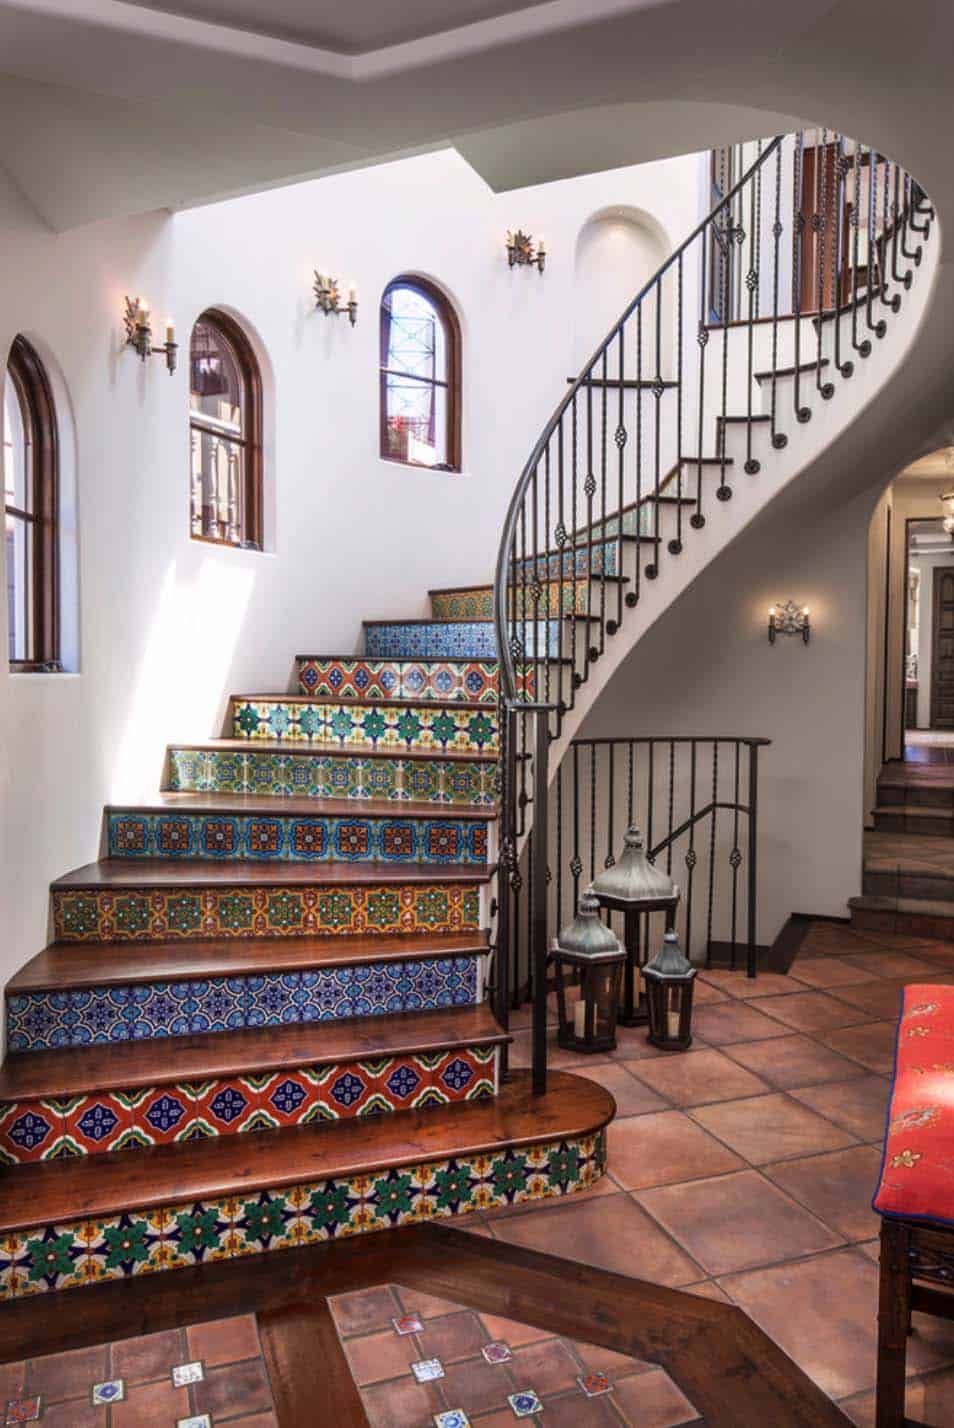 The staircase is a major focal point for the entire house thanks to its colorful tile design